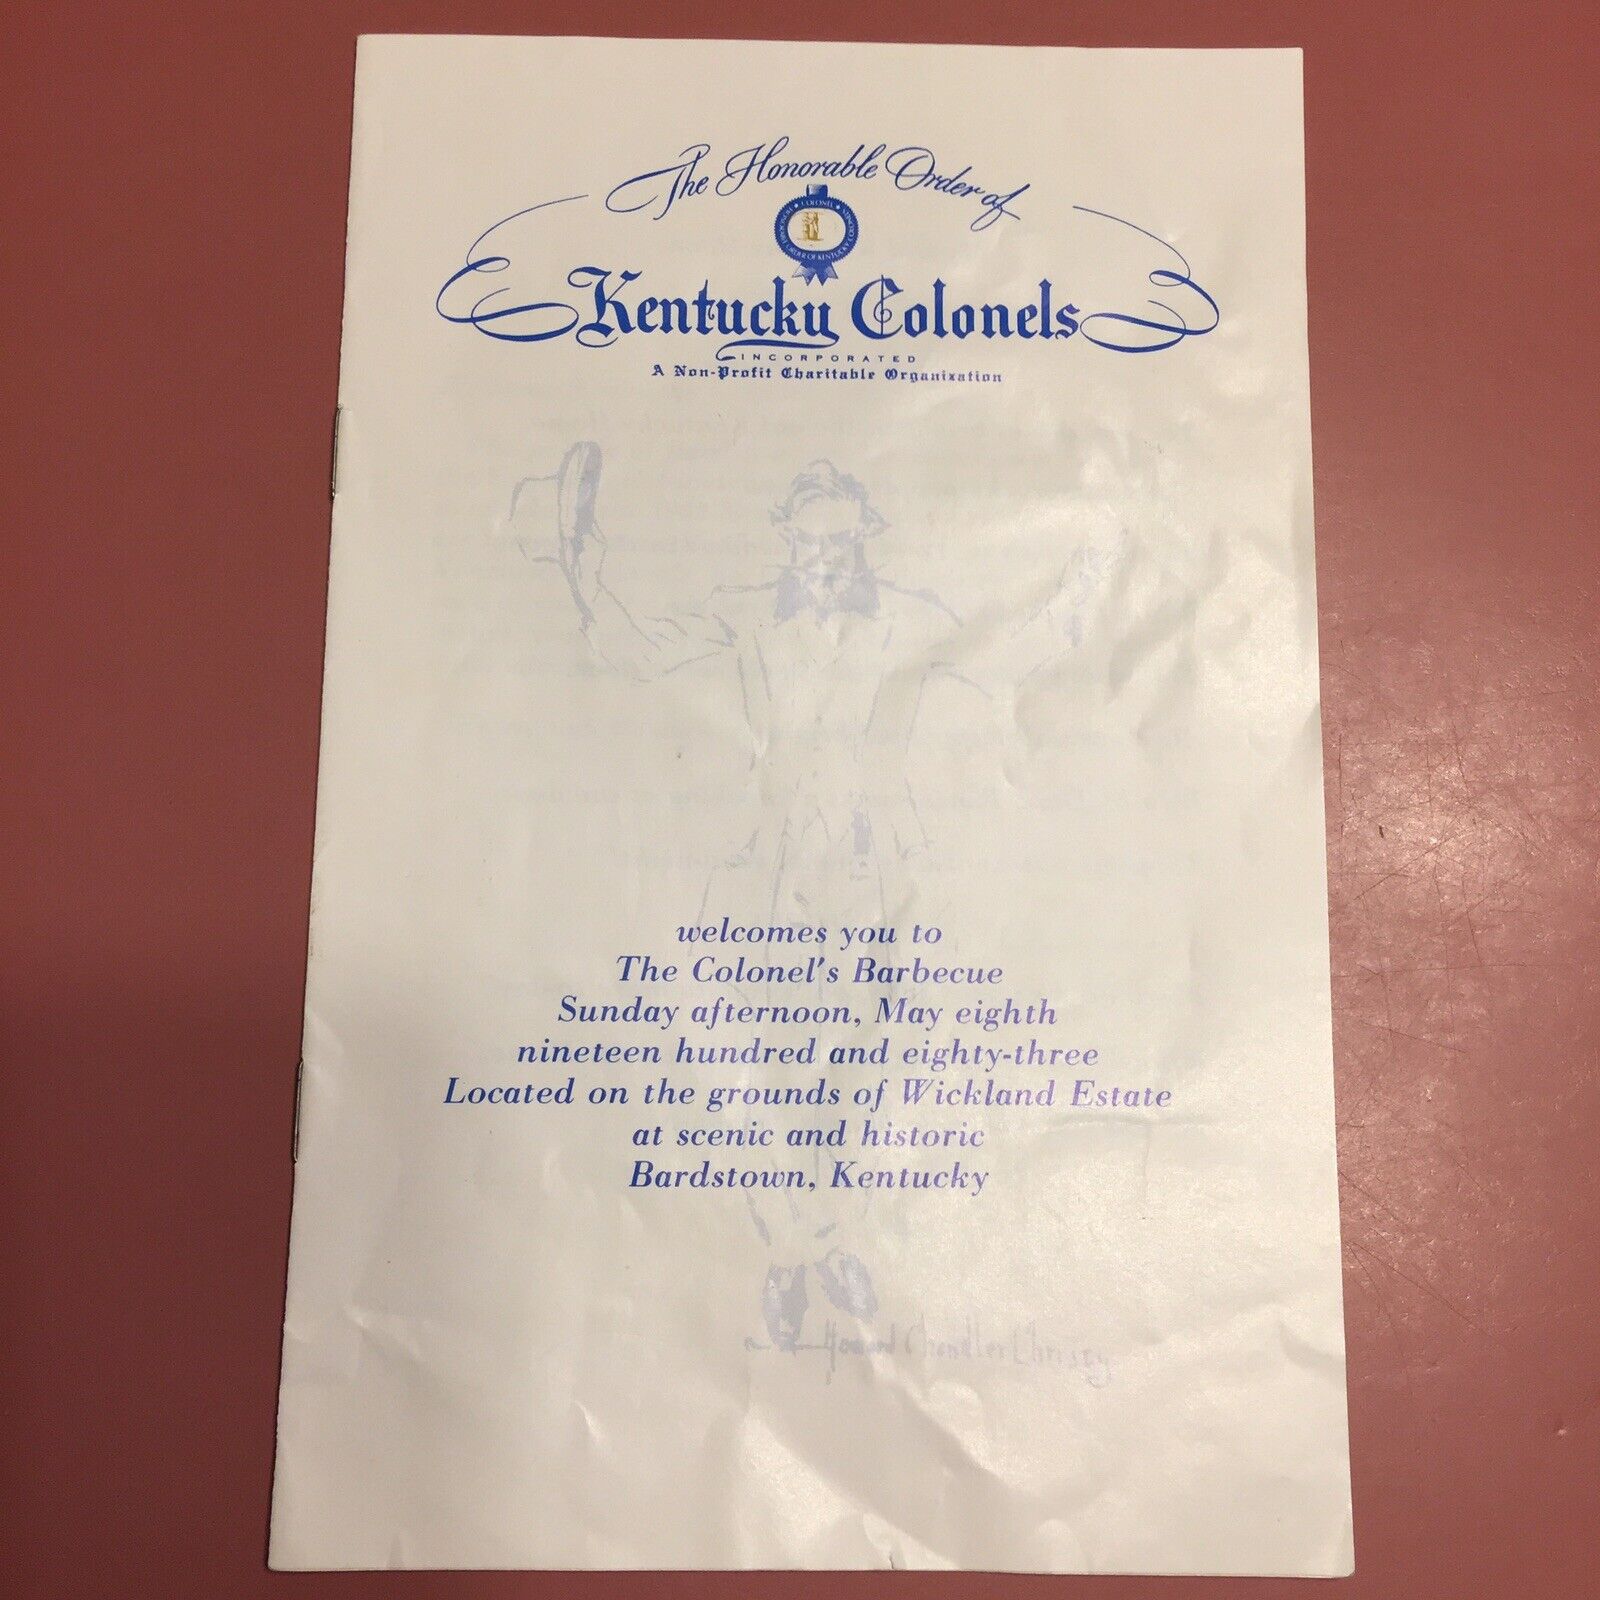 The Honorable Order Of Kentucky Colonels Barbecue Wickland Estate Derby 1983